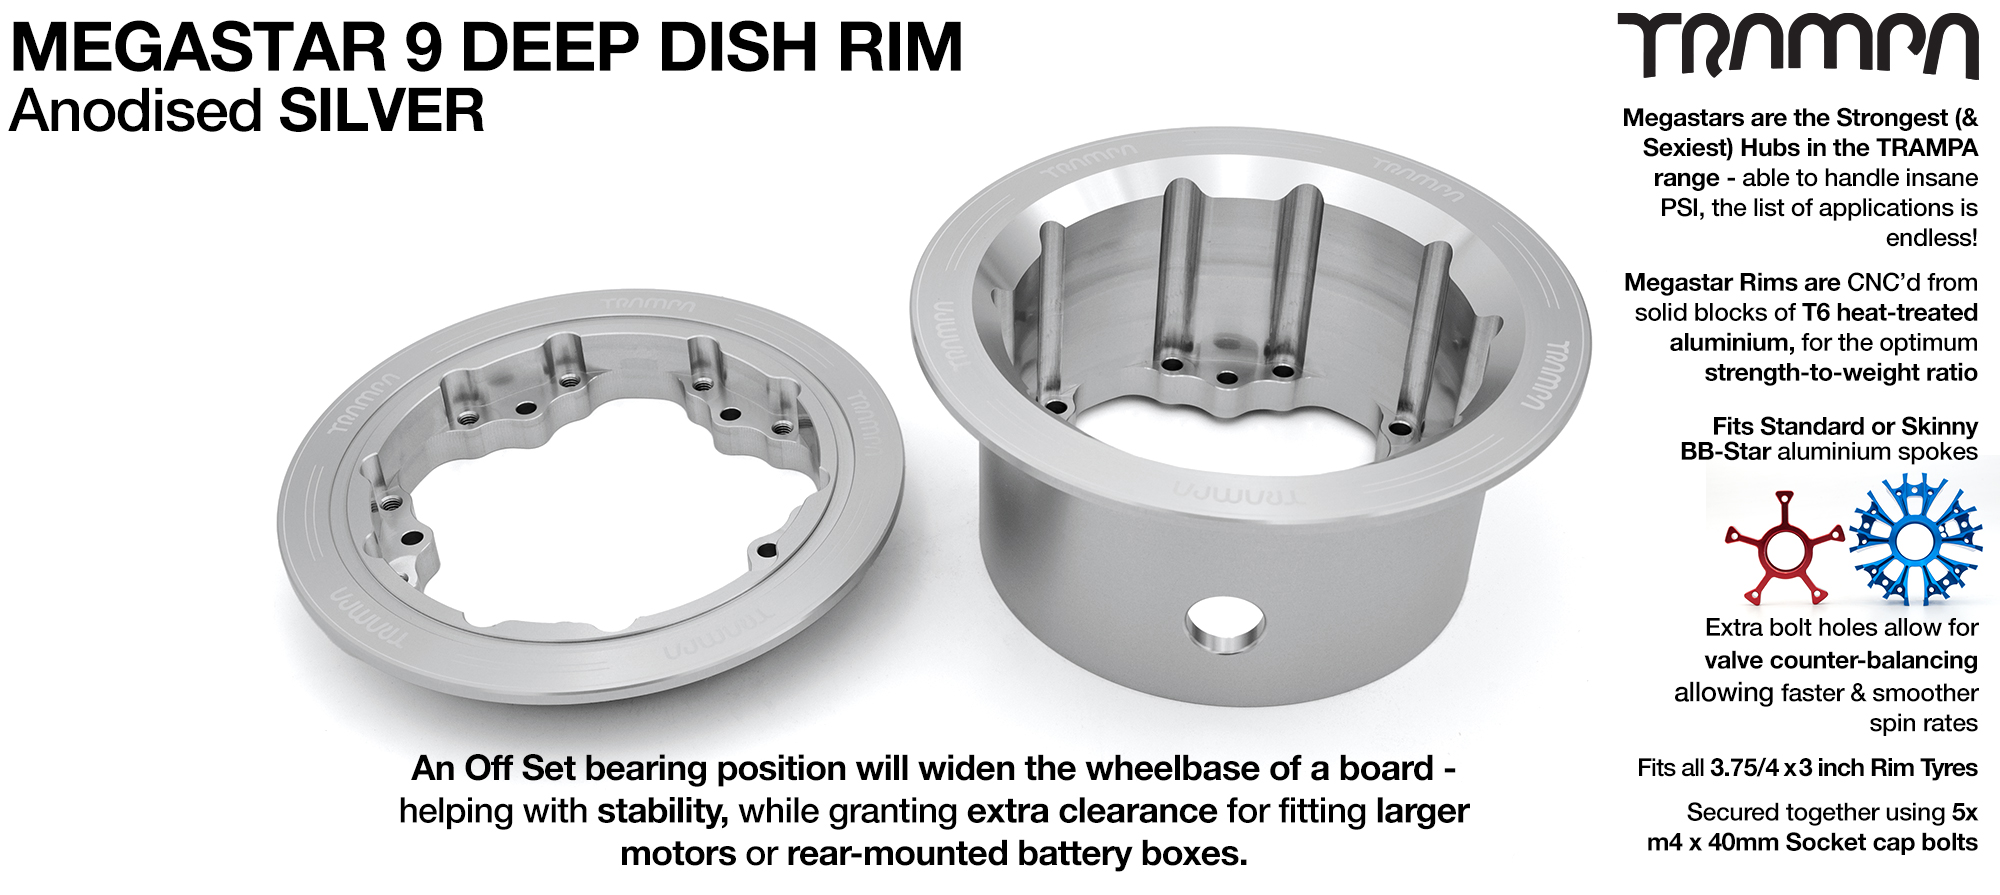 MEGASTAR 9 DD Rims Measure 3.75/4x 3 Inch. The Bearings are positioned DEEP-DISH OFF-SET & accept 3.75 & 4 Inch Rim Tyres - SILVER